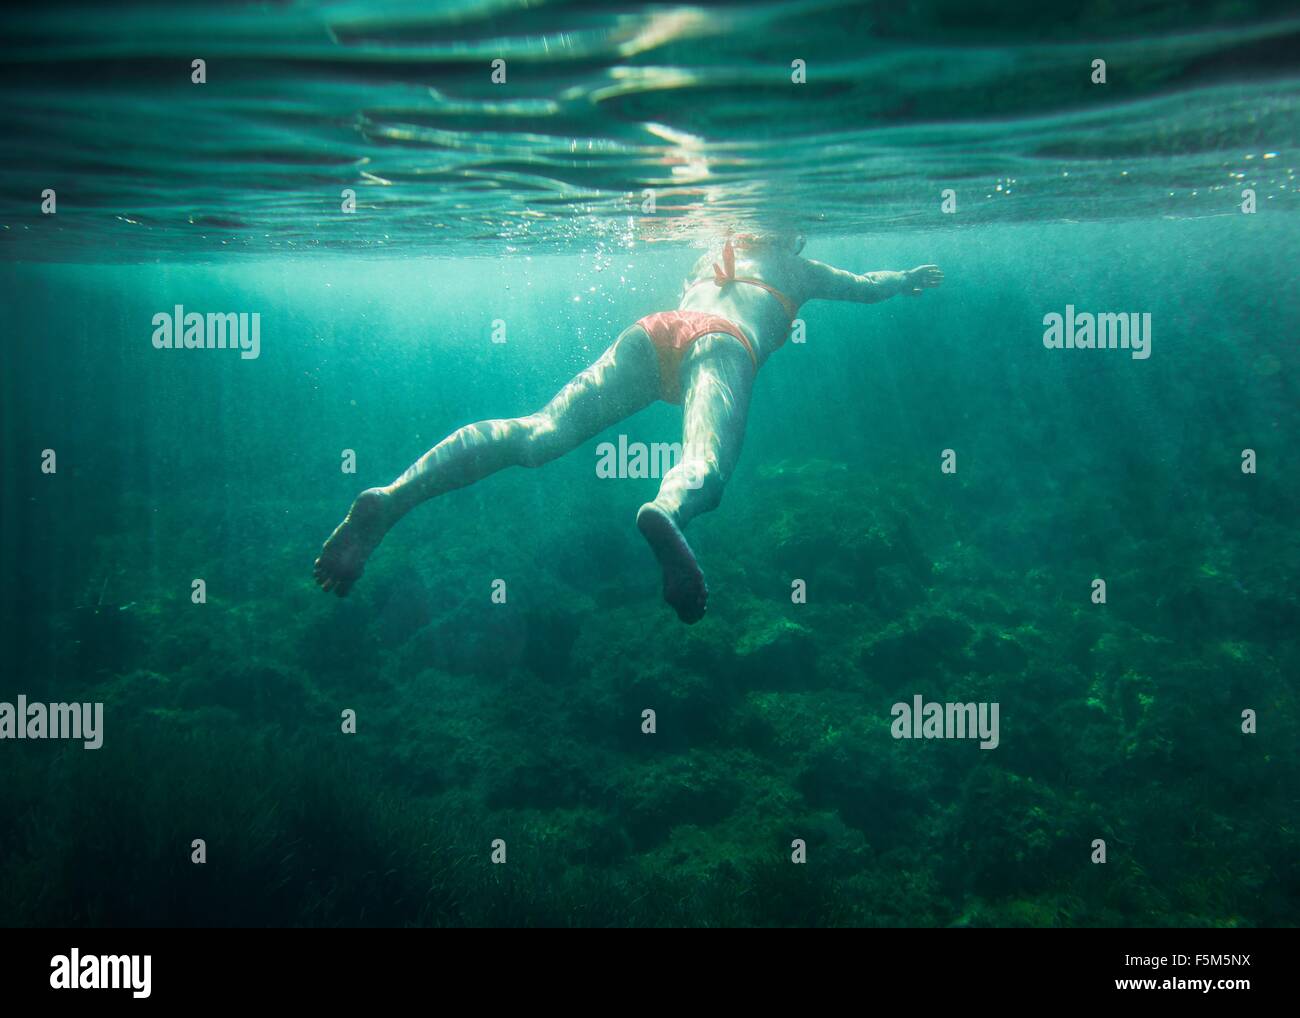 Underwater view of mid adult woman swimming, Minorque, Iles Baléares, Espagne Banque D'Images